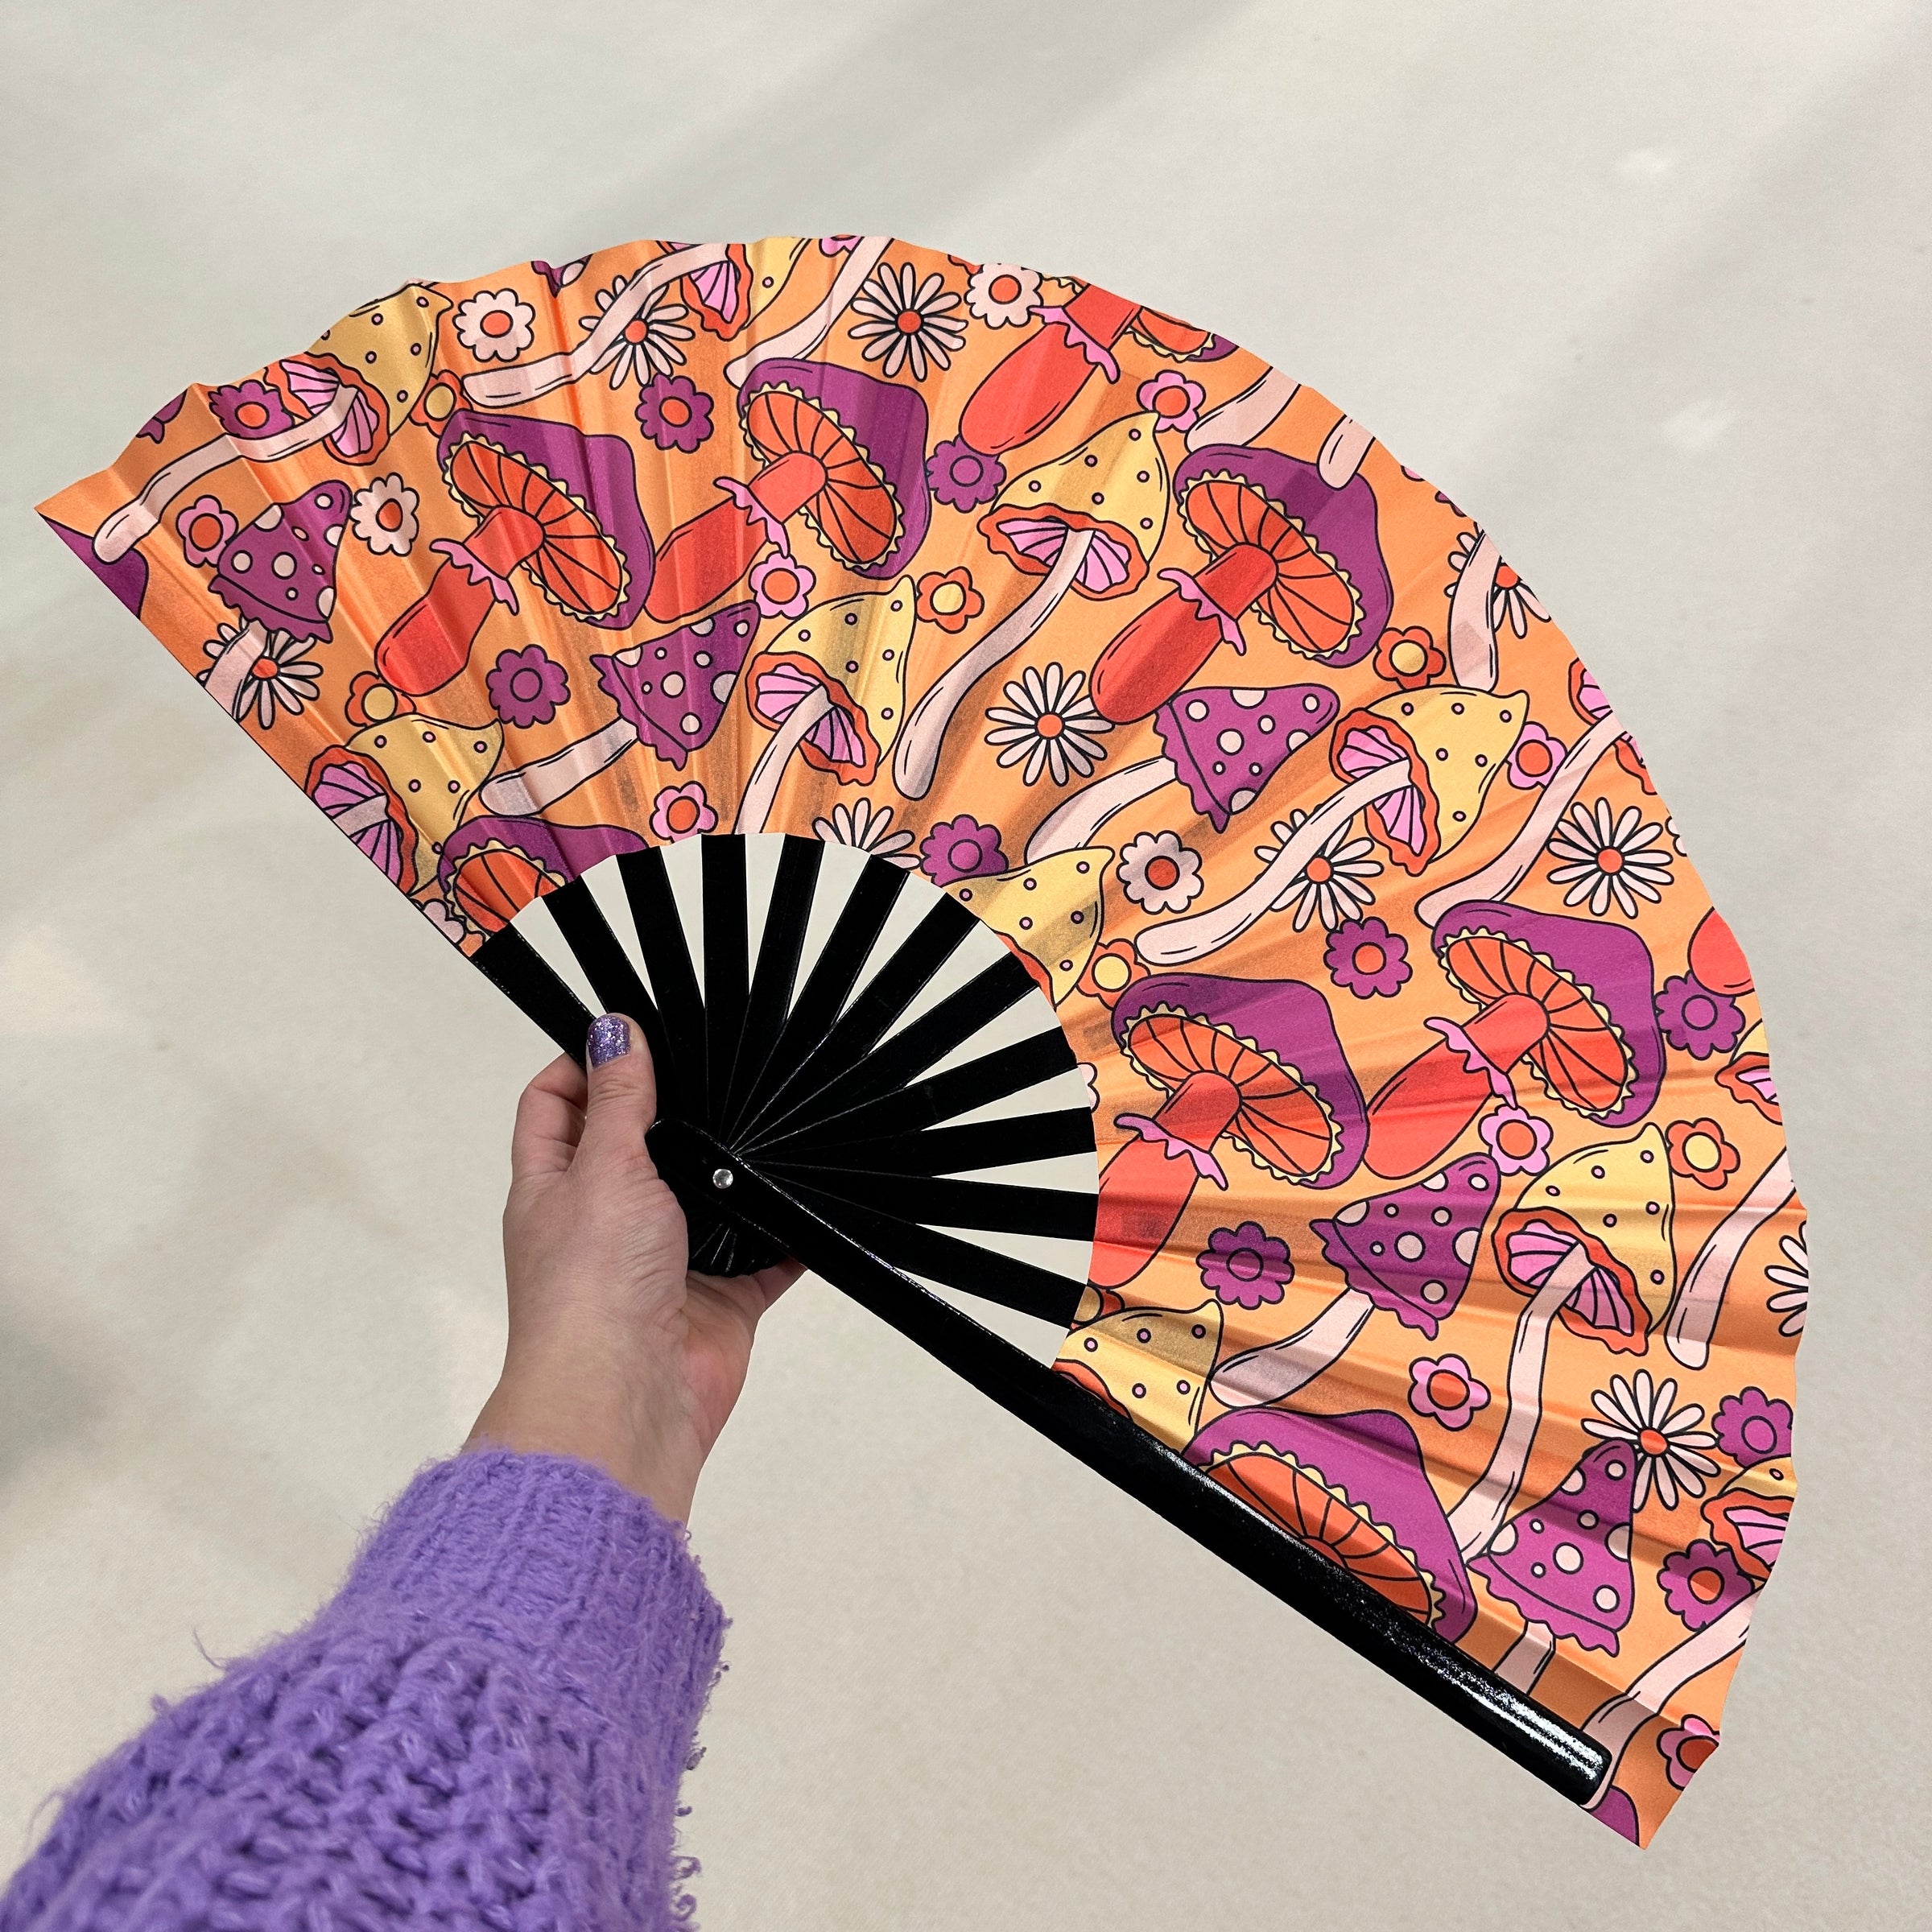 Giant Clacking Hand Fan with Orange & Purple Toadstools Print (Glows in UV!)